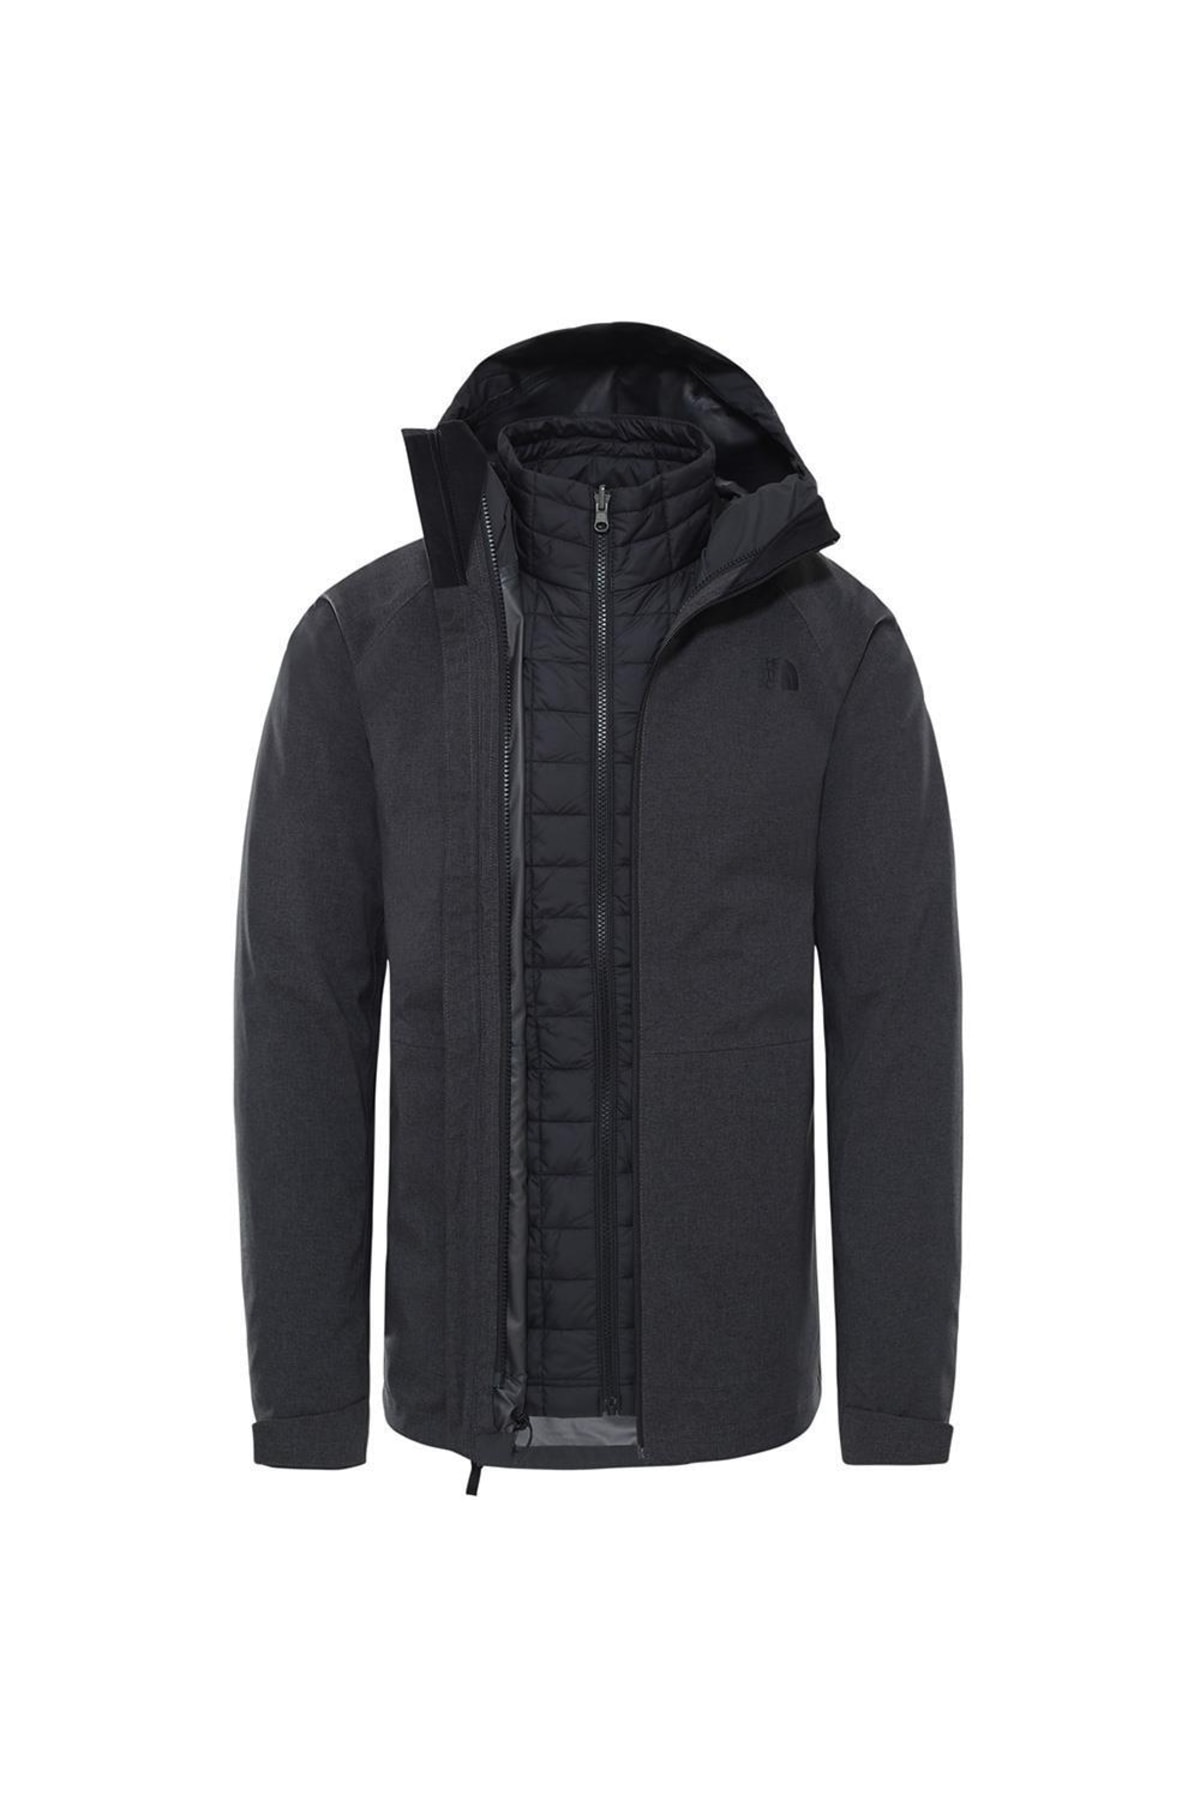 THE NORTH FACE Thermoball Eco Triclimate Erkek Ceket - T94r2kflc